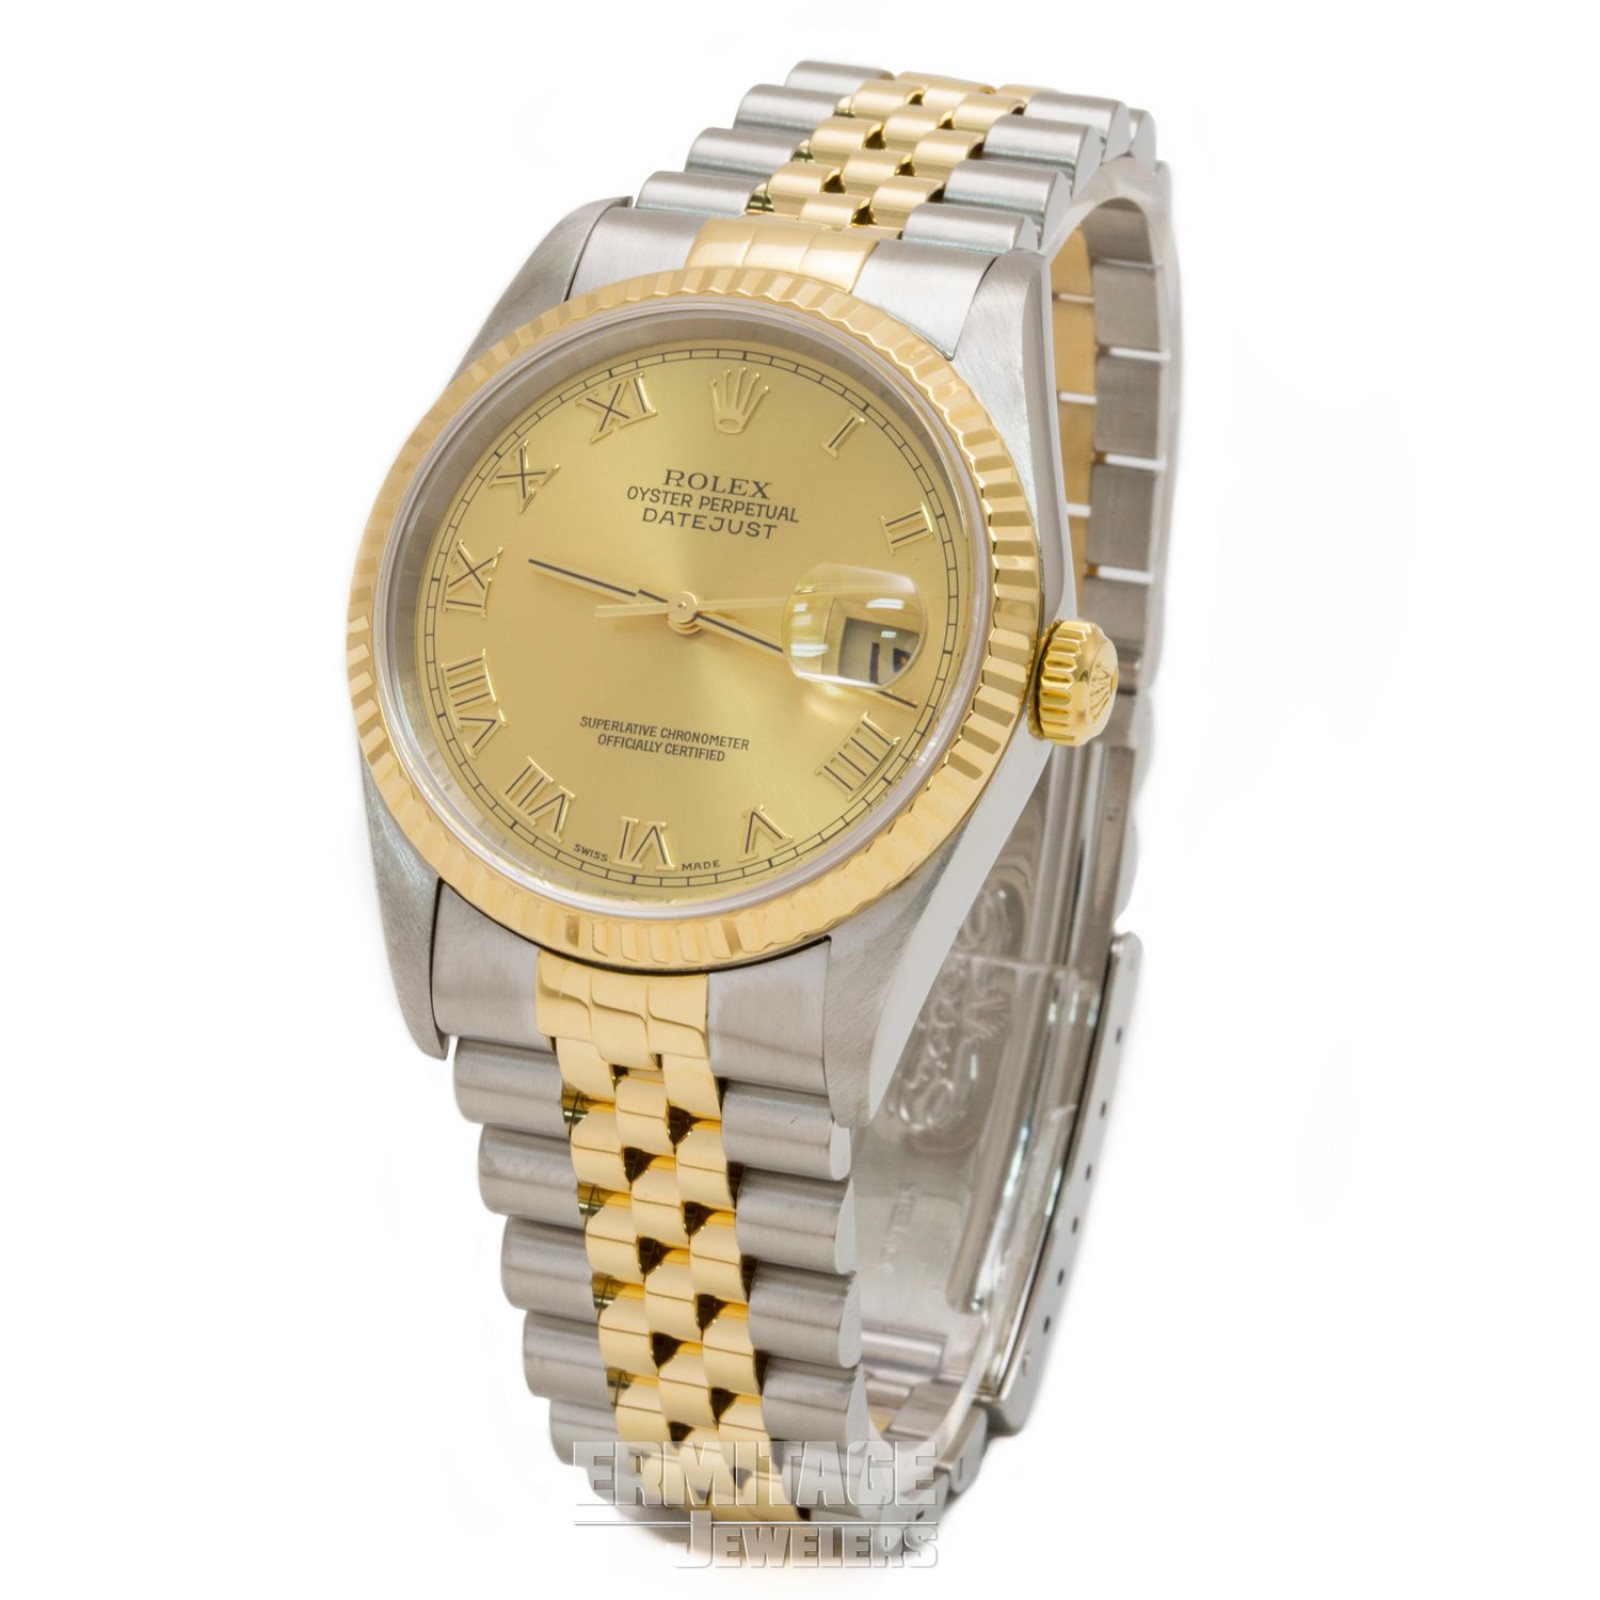 Rolex Datejust 16233 36 mm Gold & Steel on Oyster